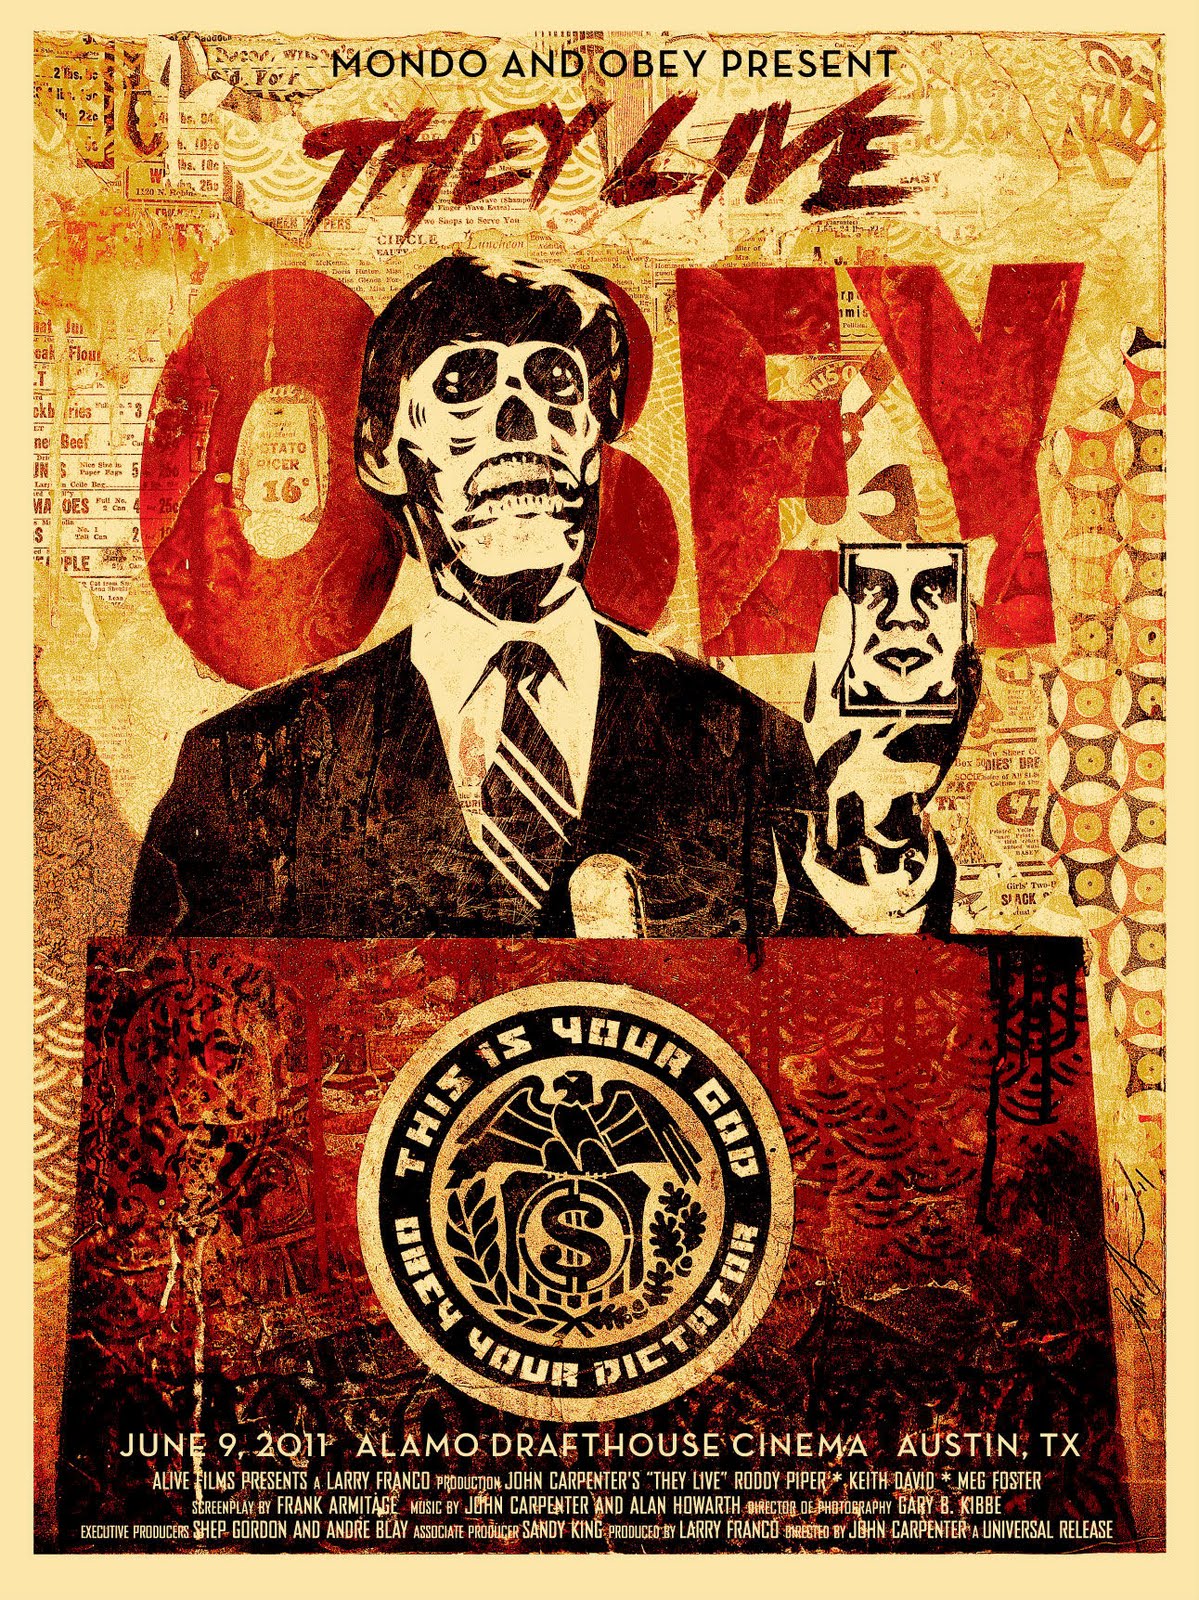 They Live!